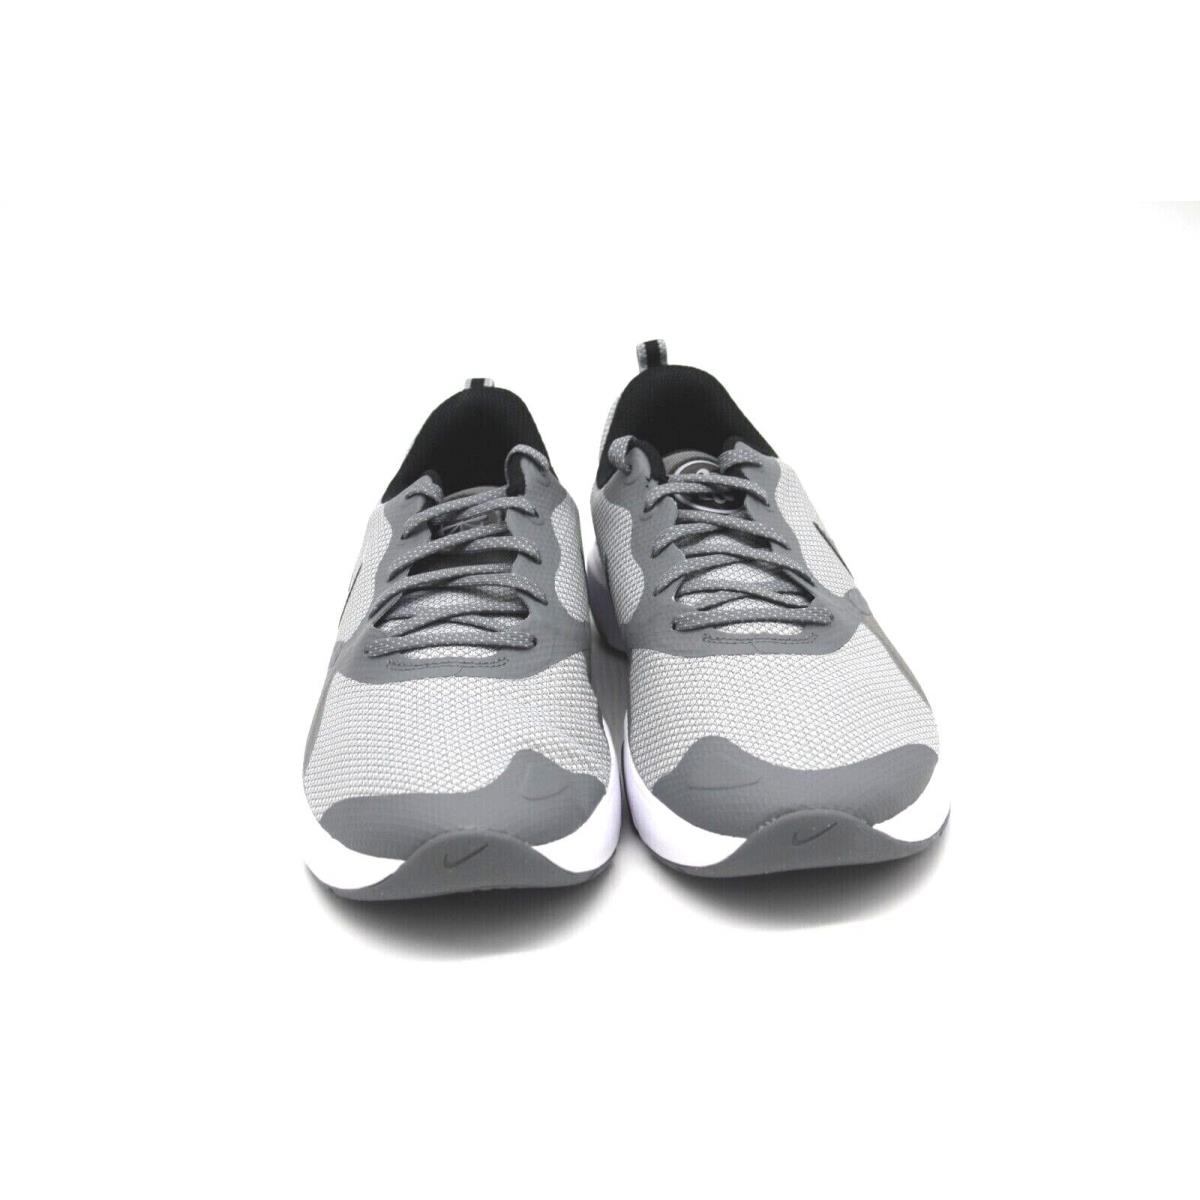 Nike shoes City Rep - Wolf Grey/Cool Grey/White/Black 1